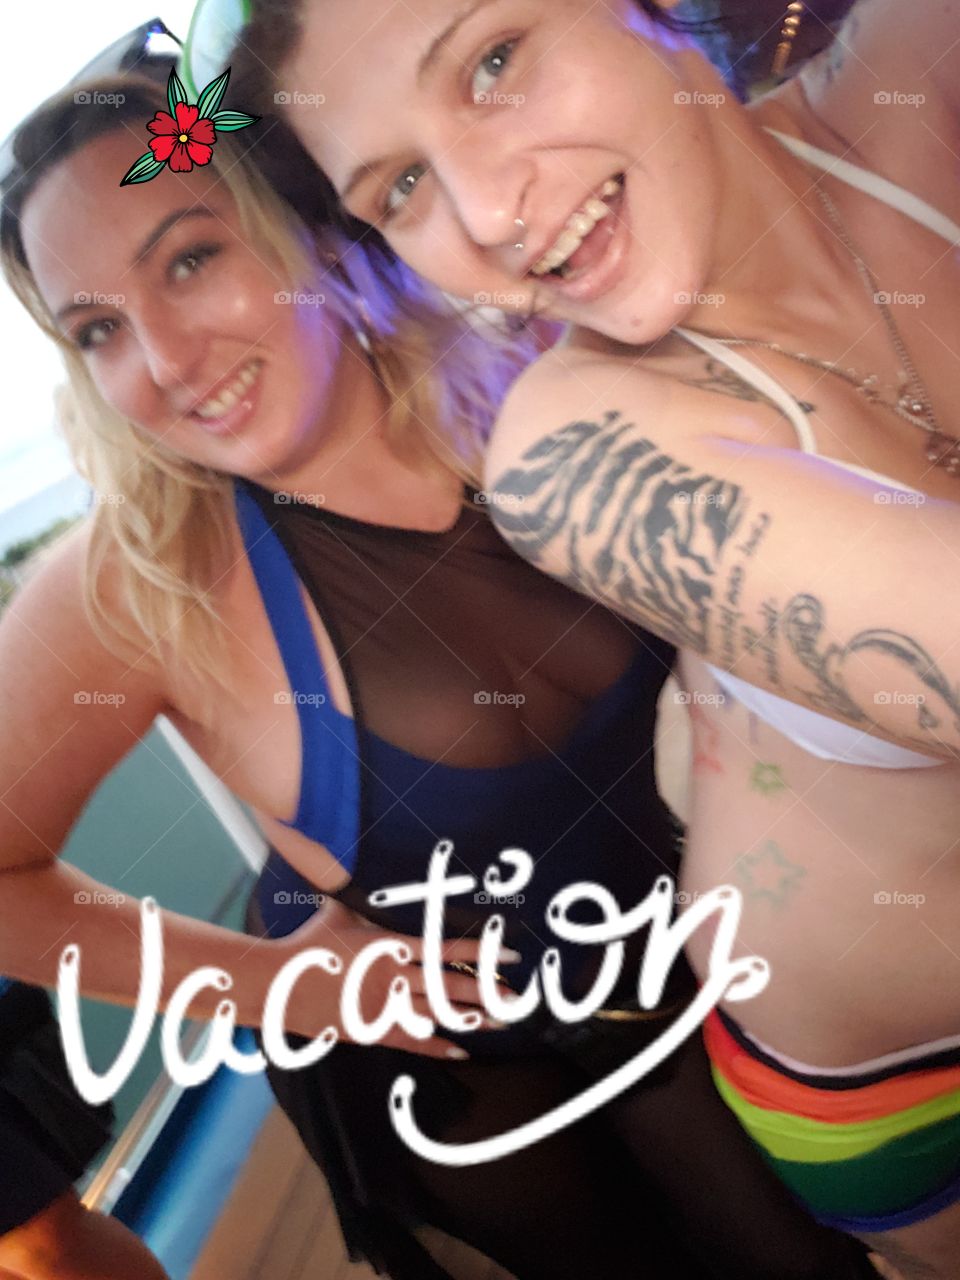 me, the one with the tats in front, hanging out on the ship with my girlfriend's sister. were just having a good time!